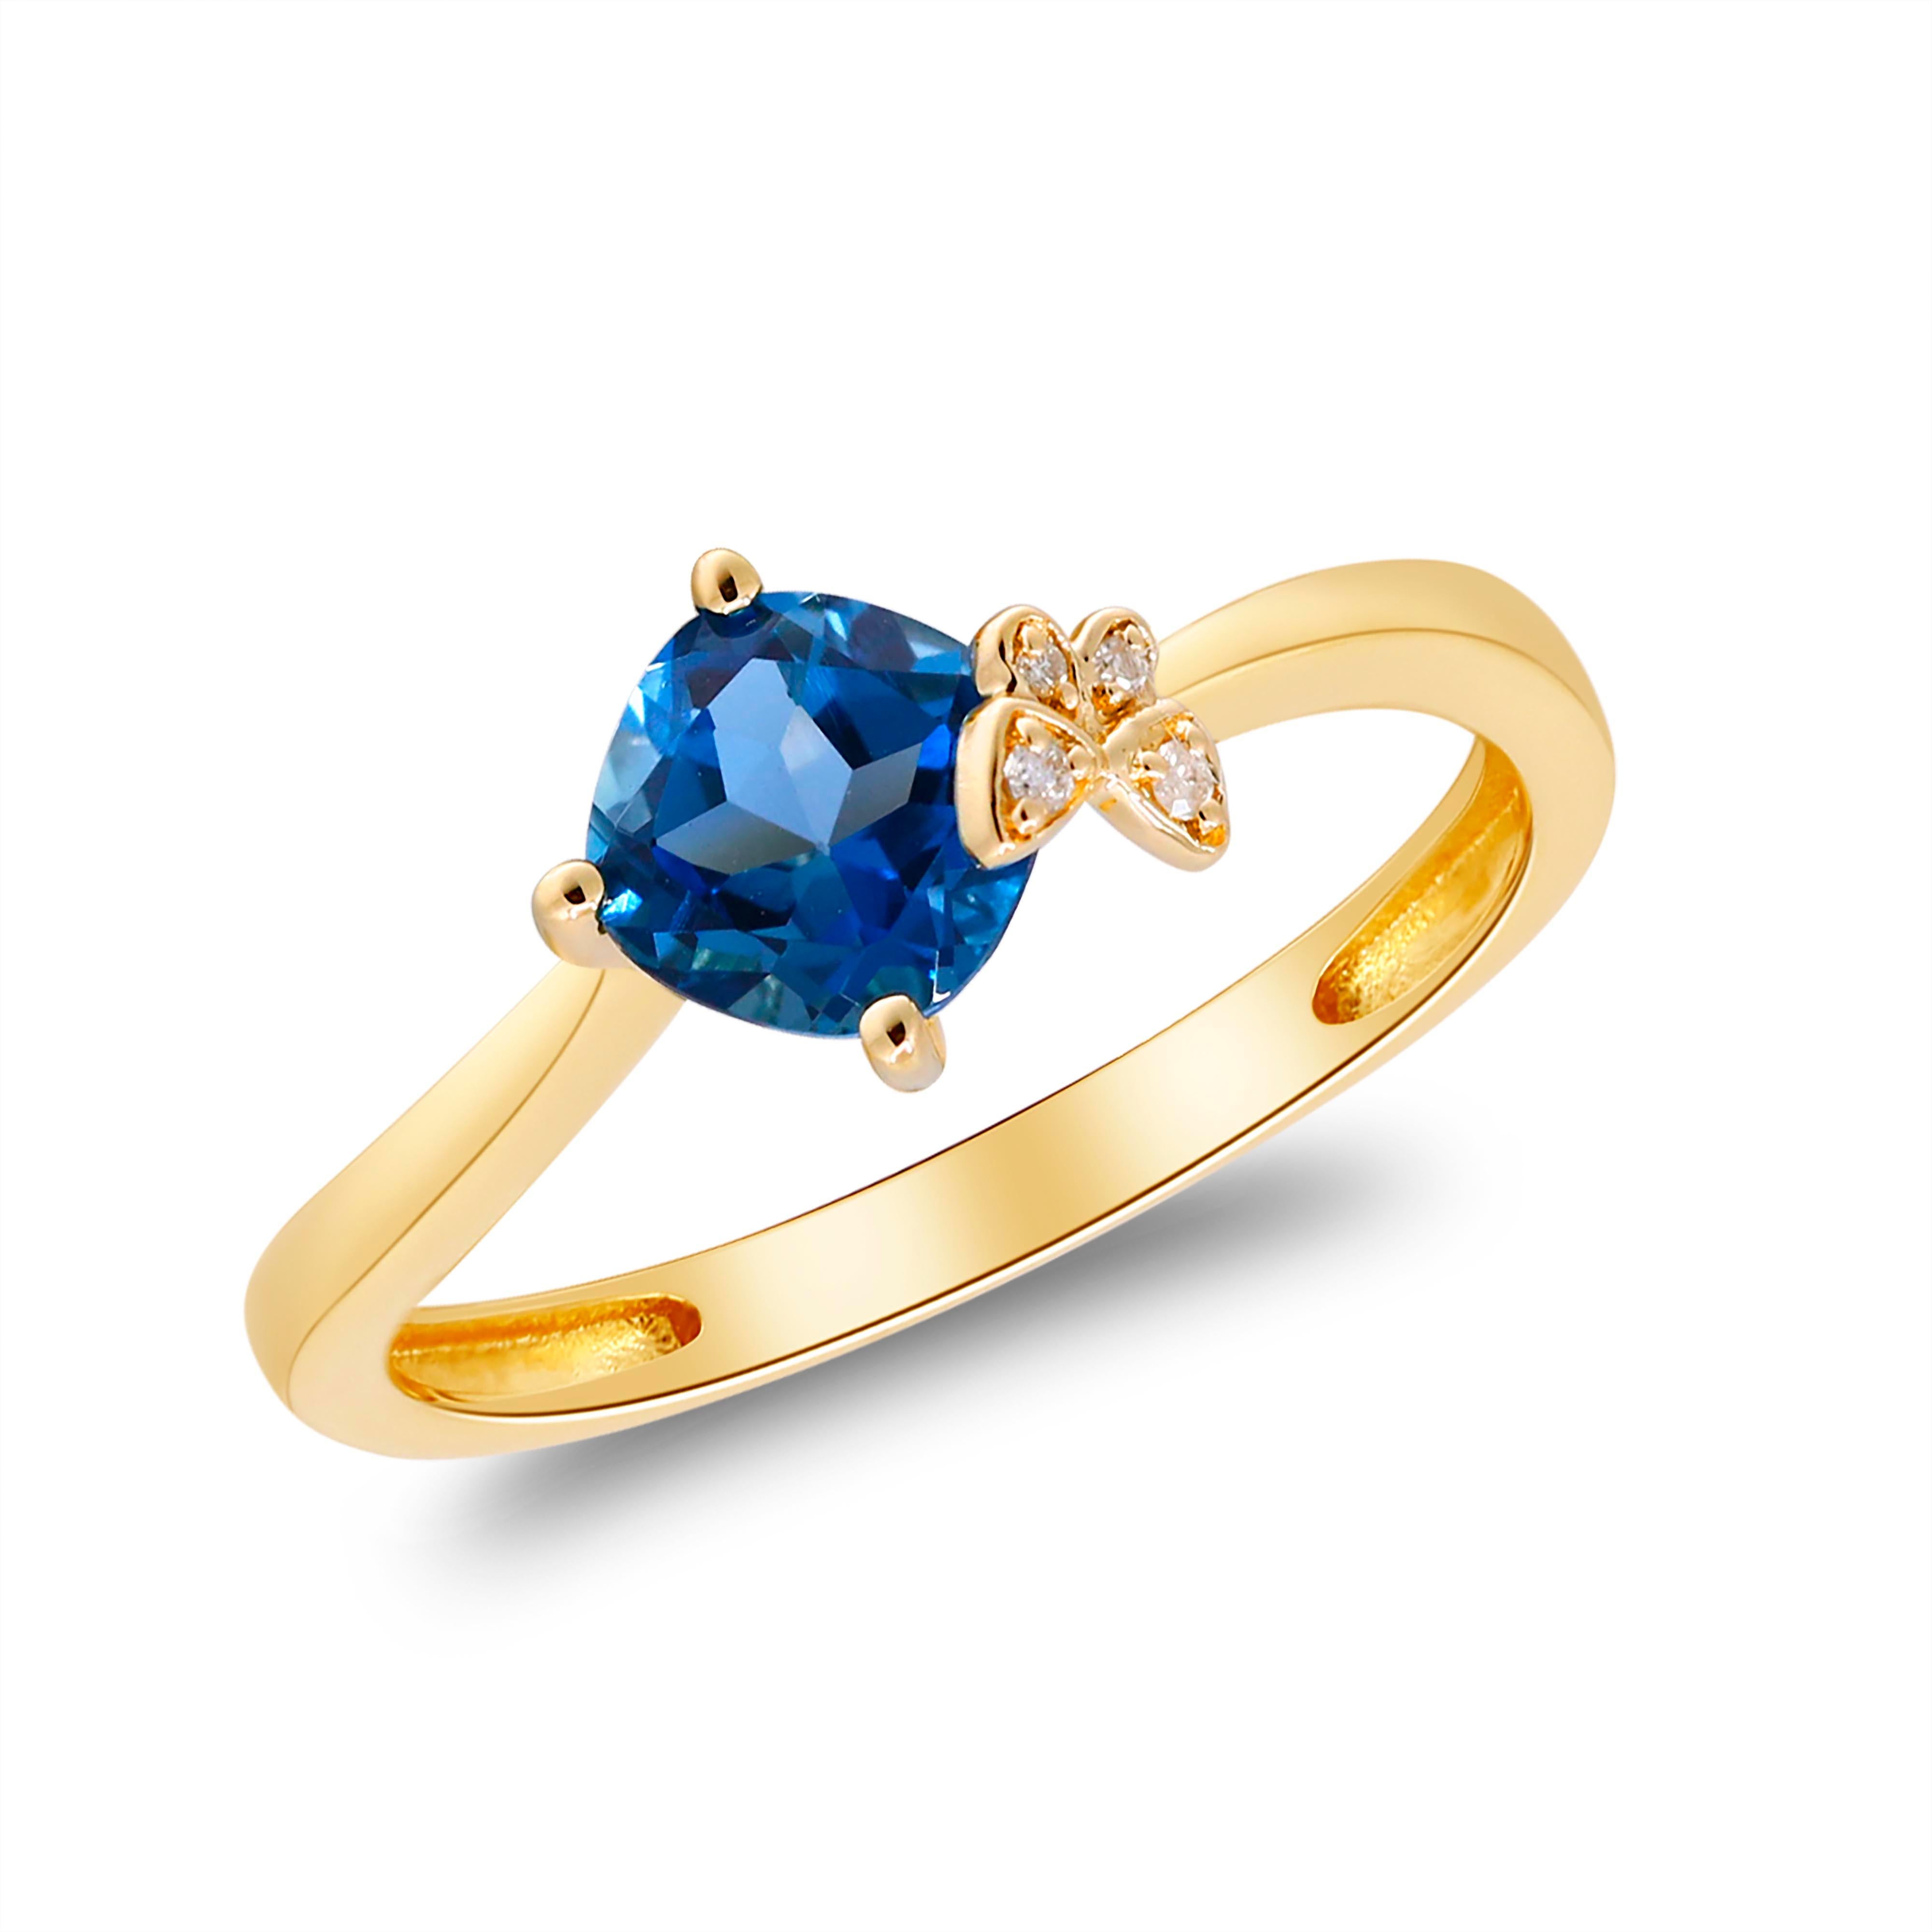 1.19 Carat Cushion-Cut London Blue Topaz Diamond Accents 14K Yellow Gold Ring In New Condition For Sale In New York, NY